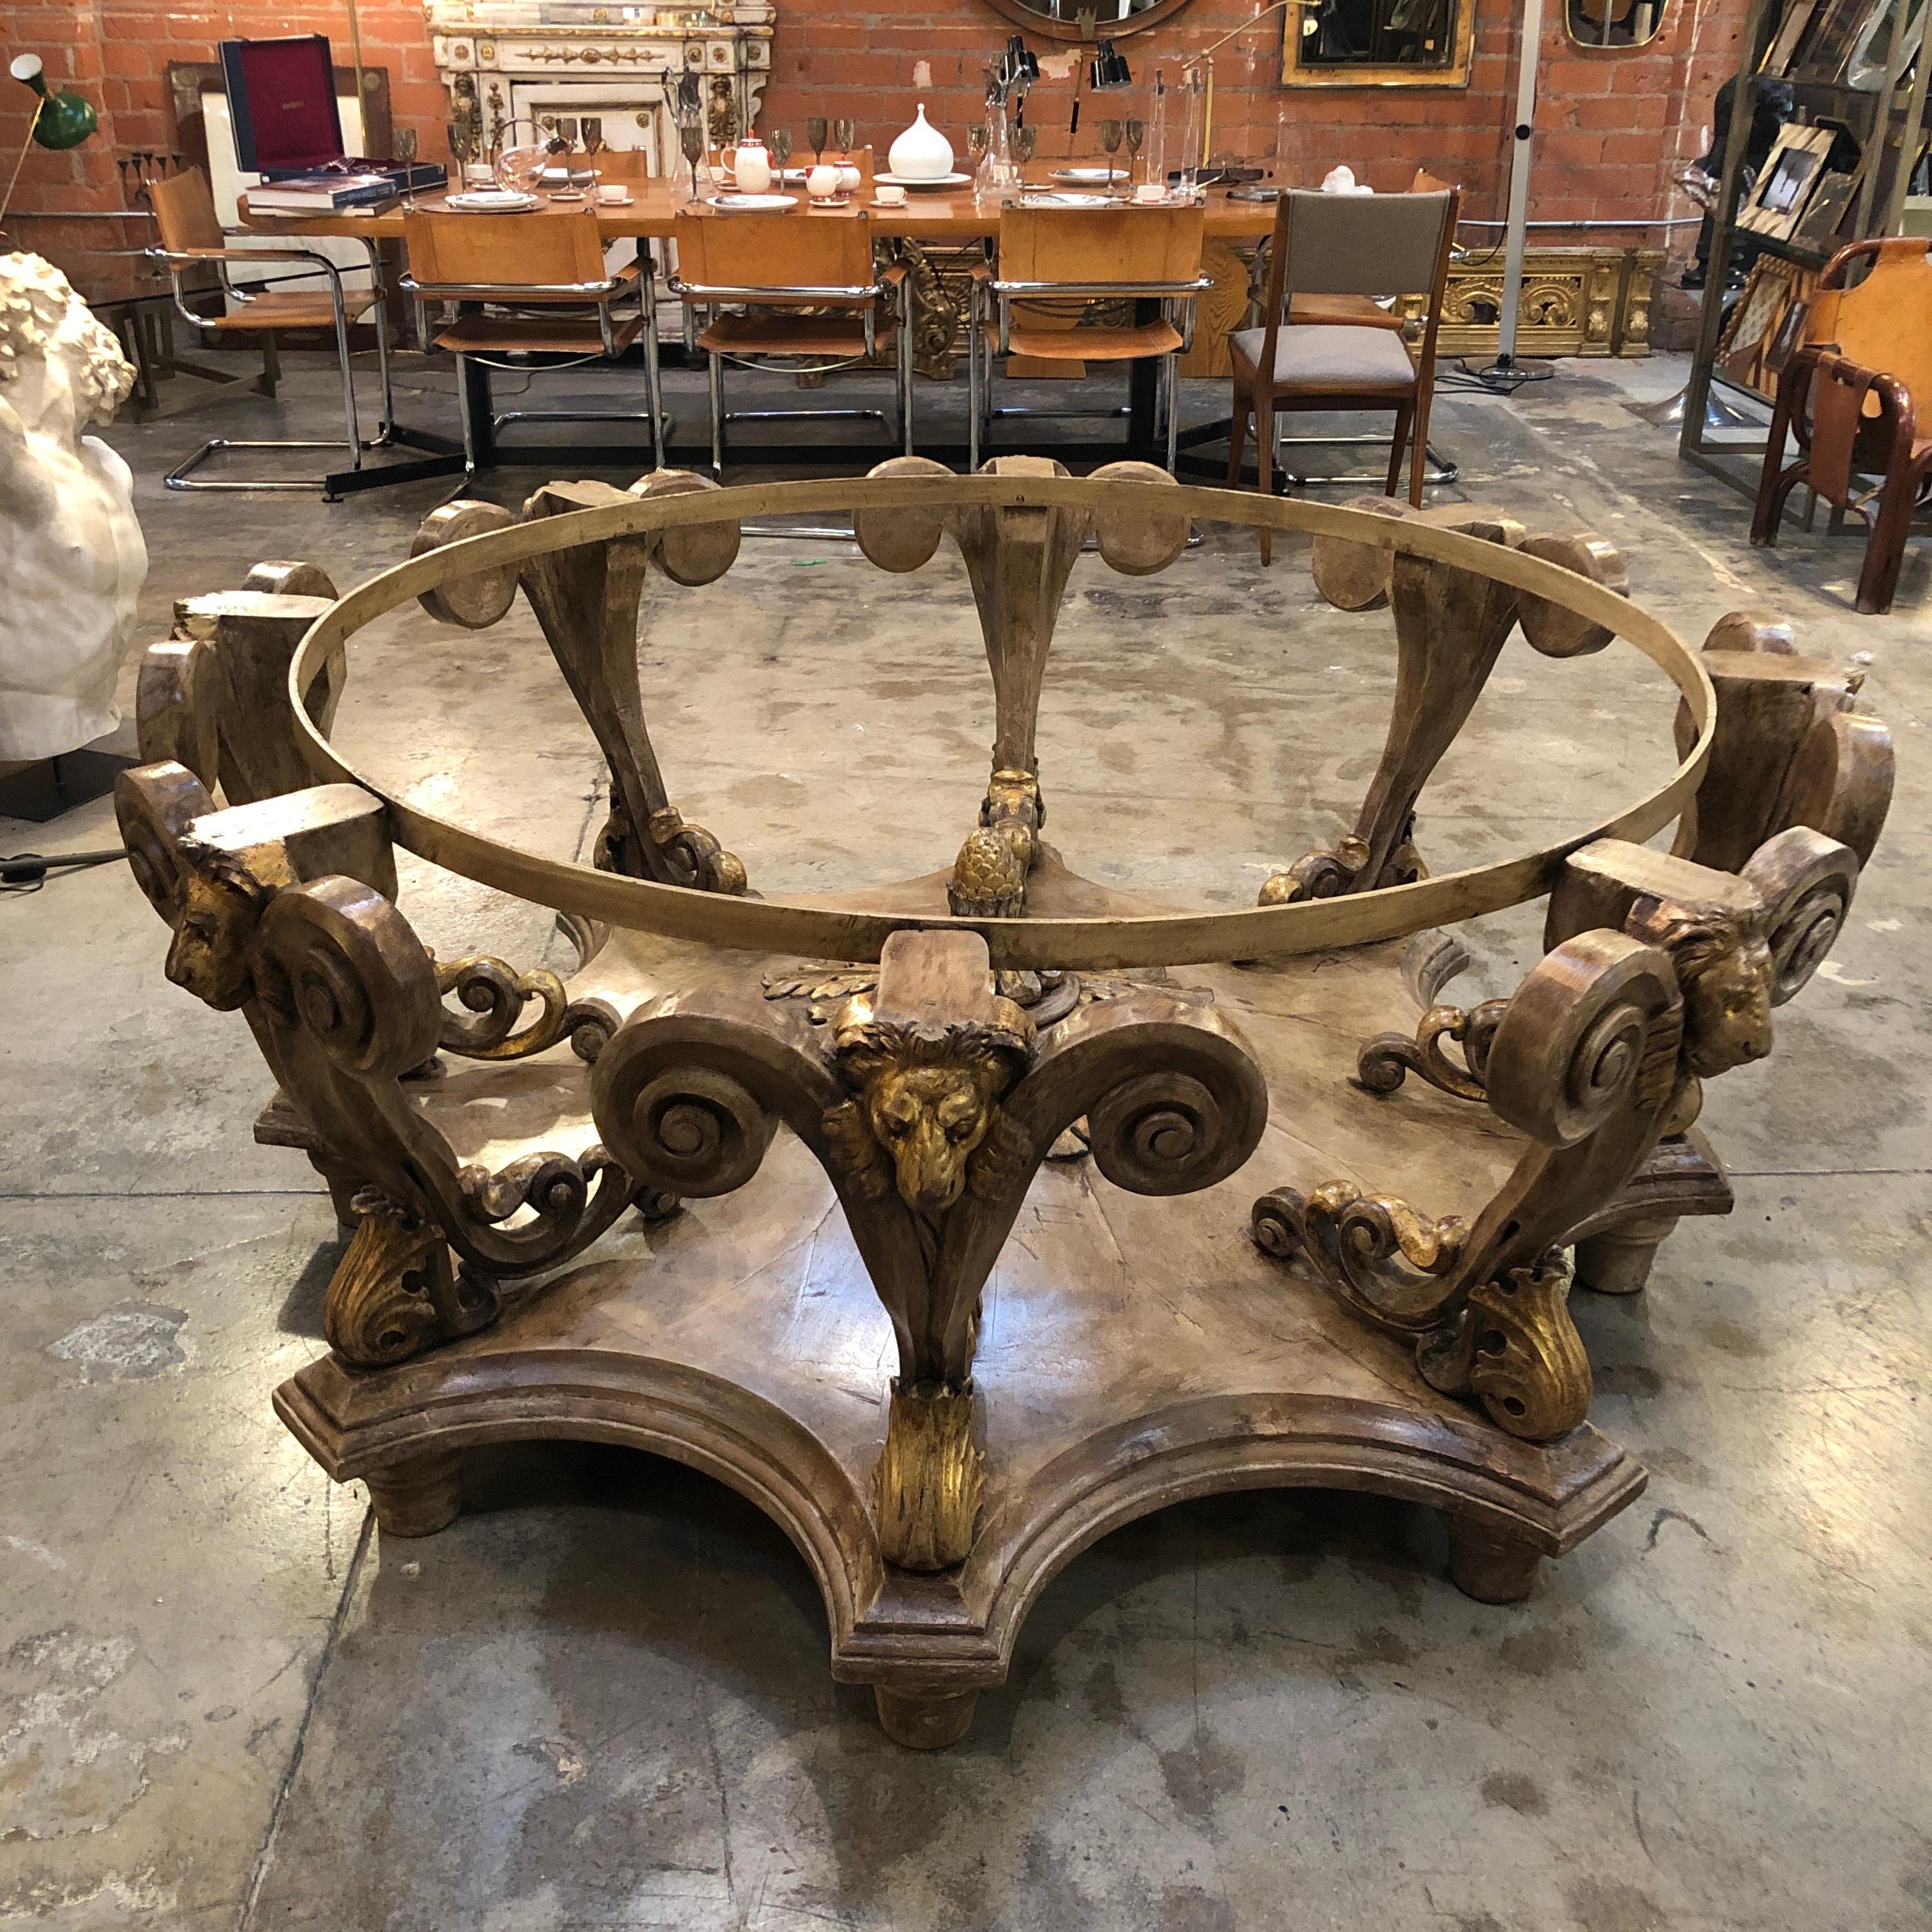 Antique Italian Baroque style round table. Item features a glass top, a solid hand carved beech tree wood and 8 feet pedestal base, and a desirable distress painted finish. The base is believed to be from the early 18th century while the top in